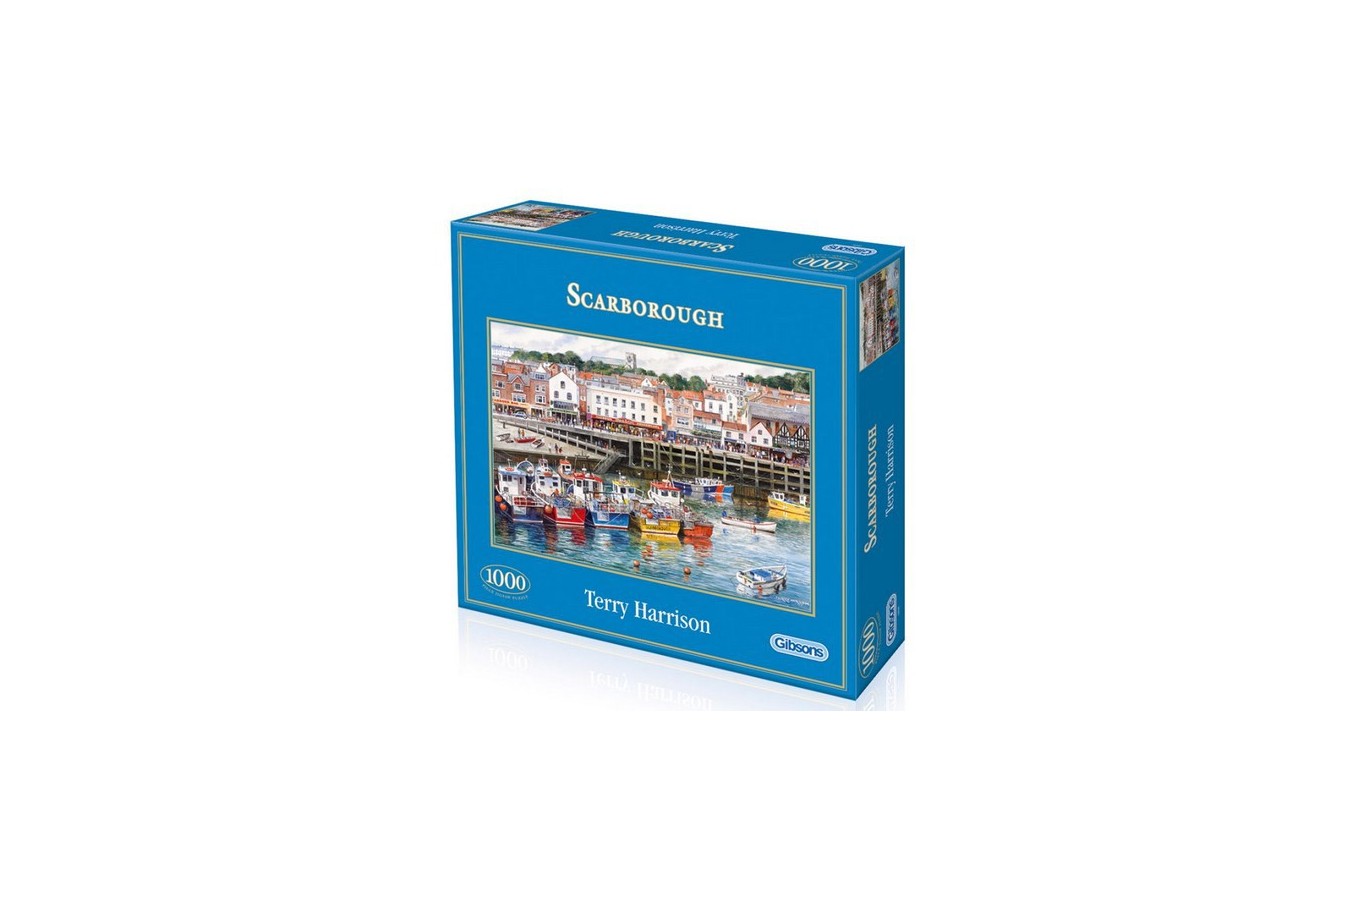 Puzzle Gibsons - Scarborough Fishing Harbour, 1000 piese (11213)